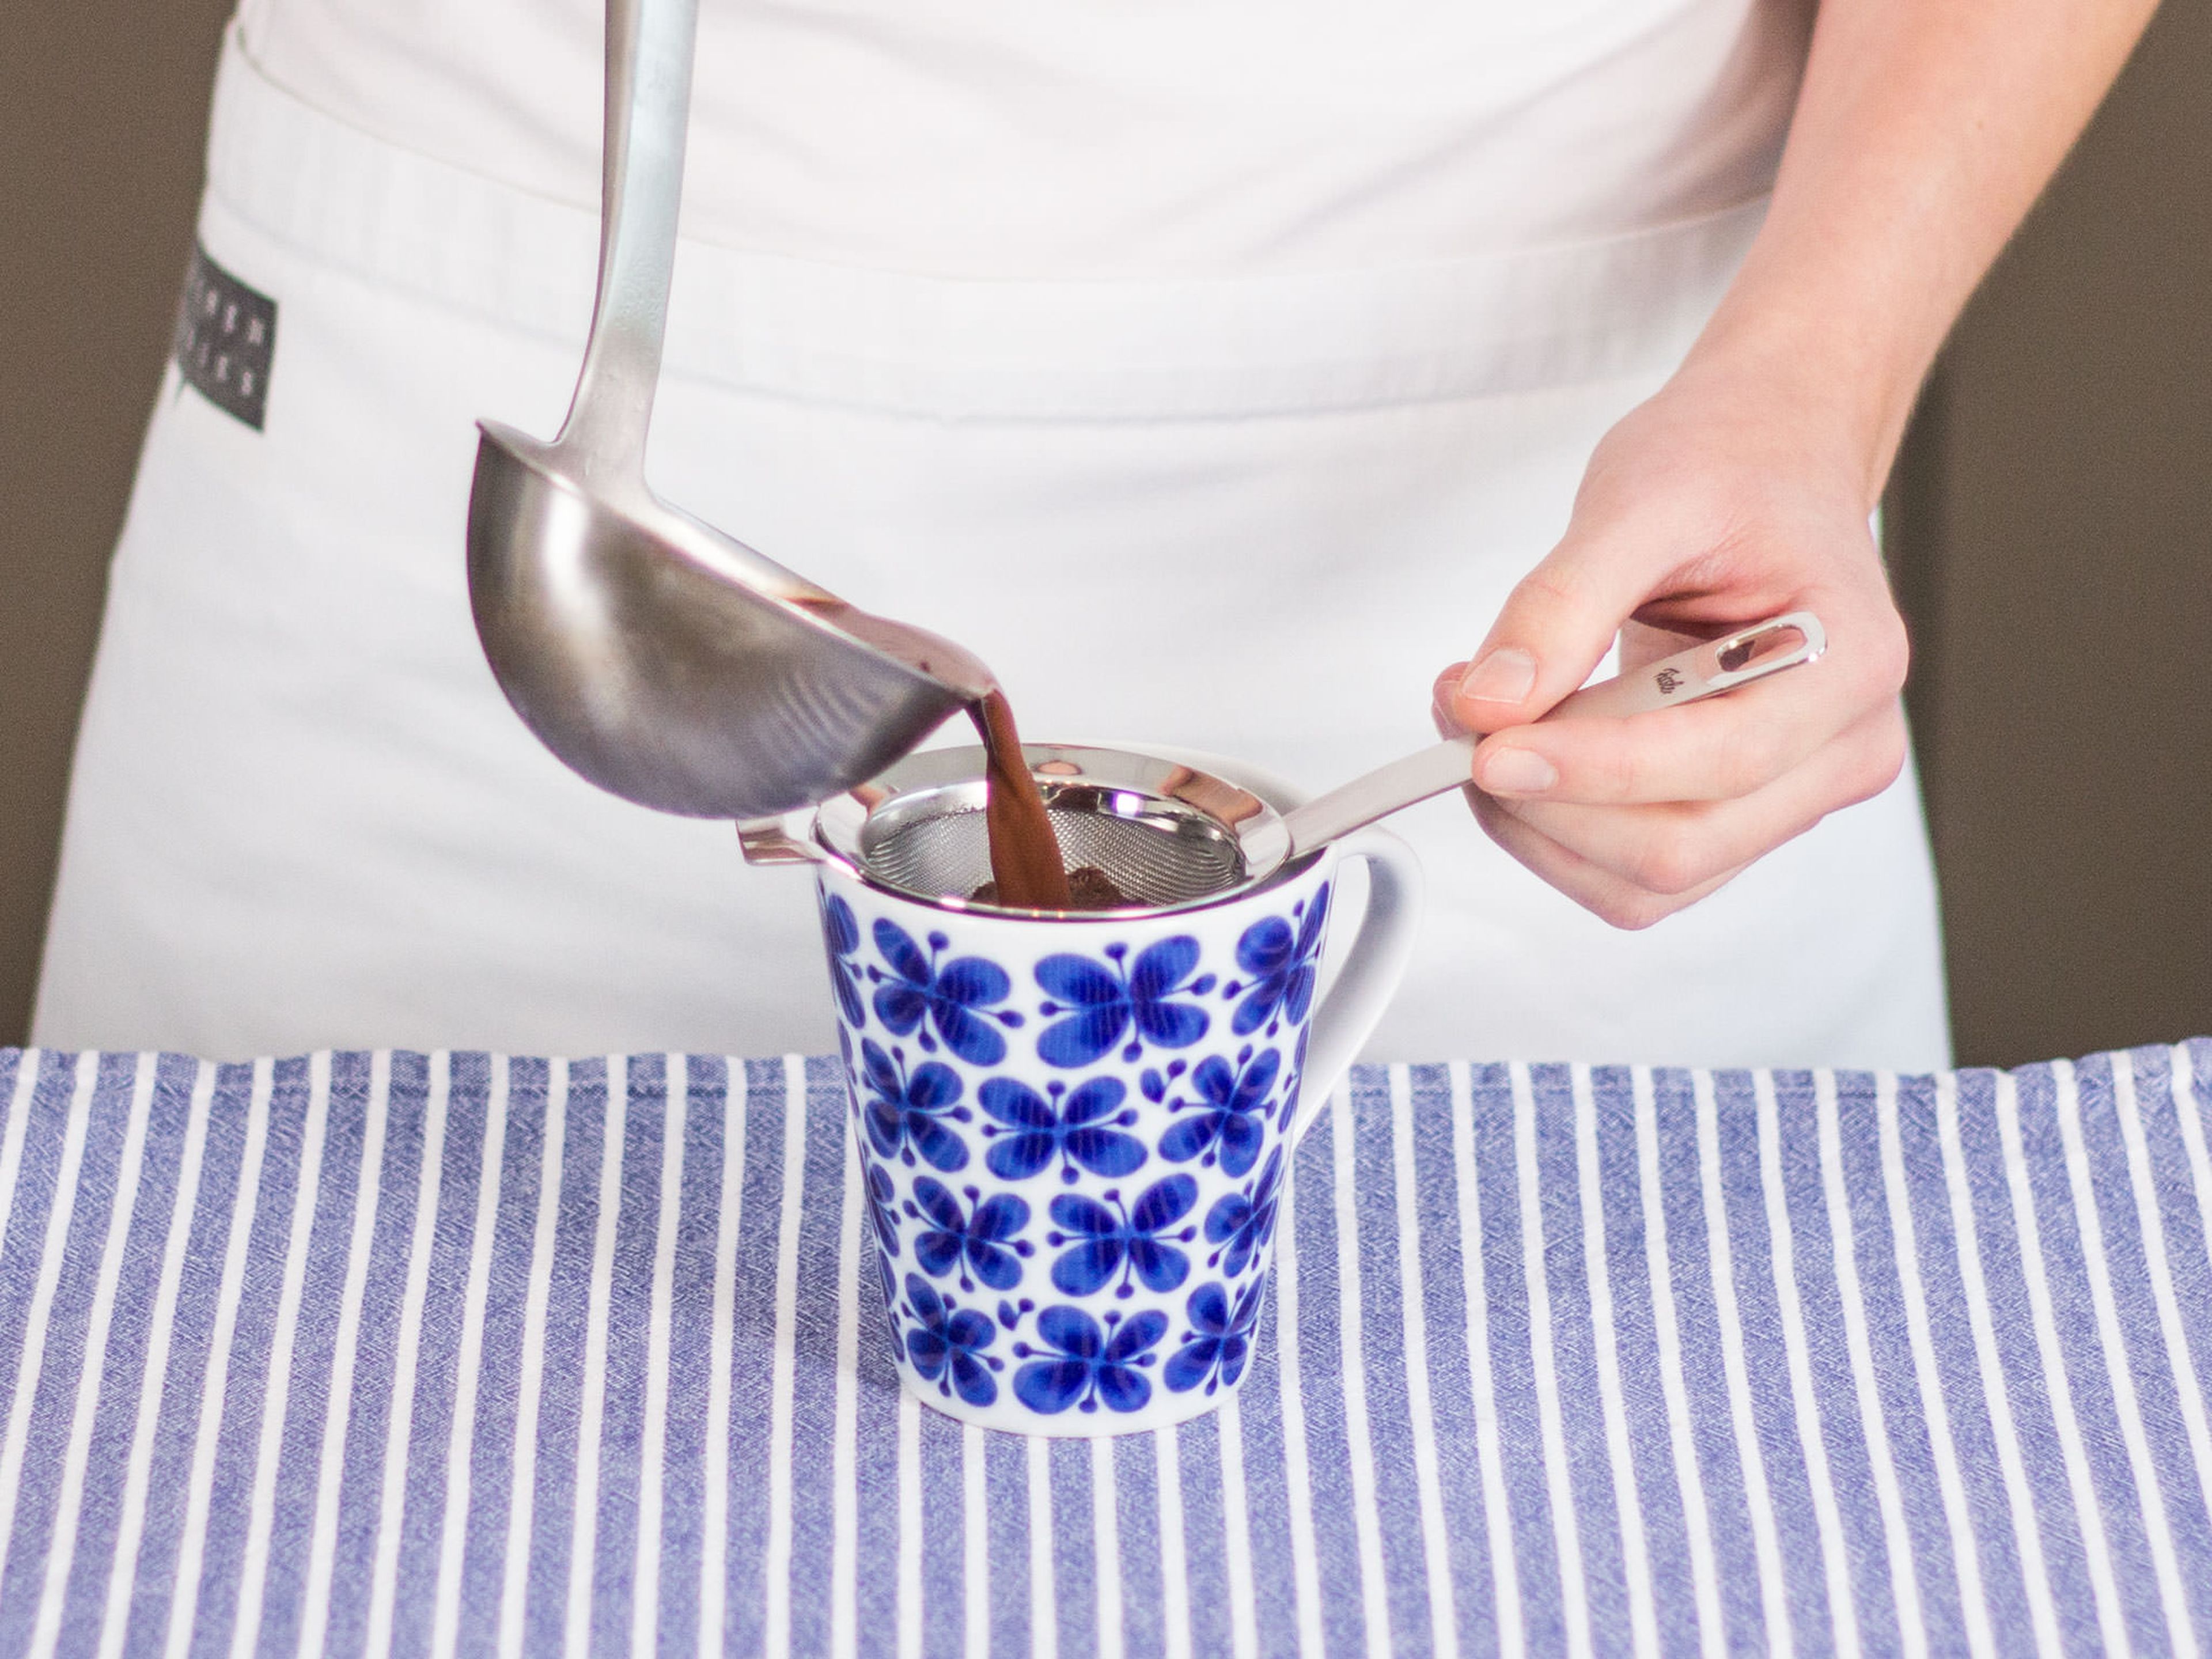 Place a sieve over a cup for serving. Ladle chai hot chocolate into mug. Remove sieve and enjoy straightaway!